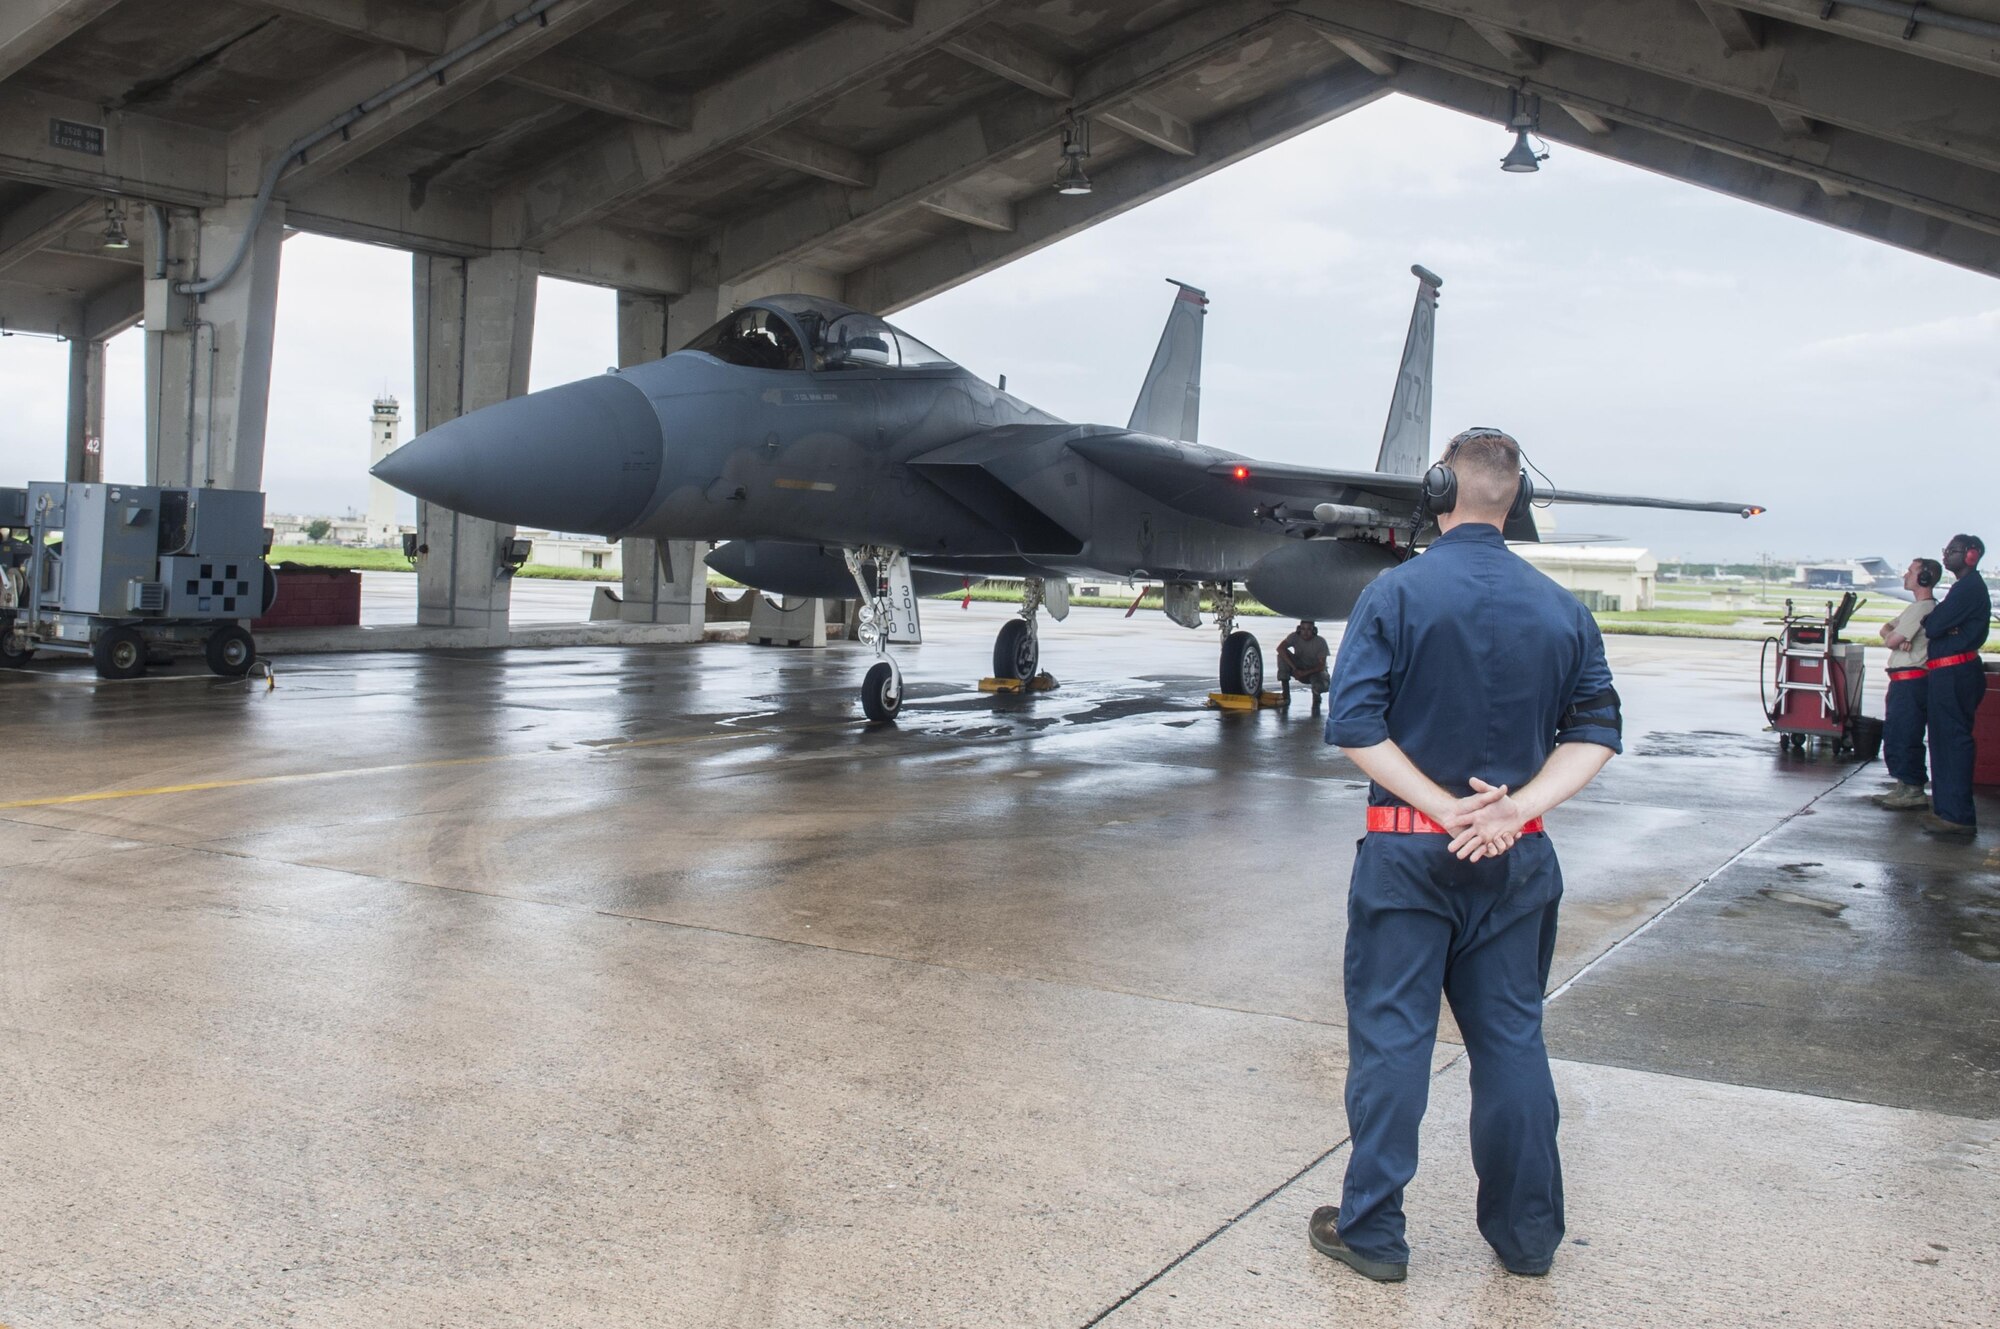 Airman 1st Class Dennis Hatcher, 18th Aircraft Maintenance Squadron crew chief, prepares to guide an F-15 Eagle Sept. 9, 2016, at Kadena Air Base, Japan. F-15 Eagles departed from Kadena in support of Exercise Valiant Shield. Valiant Shield is a joint exercise between the U.S. armed forces which focuses on maintaining land, air, sea and cyberspace dominance in the Pacific. (U.S. Air Force photo by Senior Airman Lynette M. Rolen)